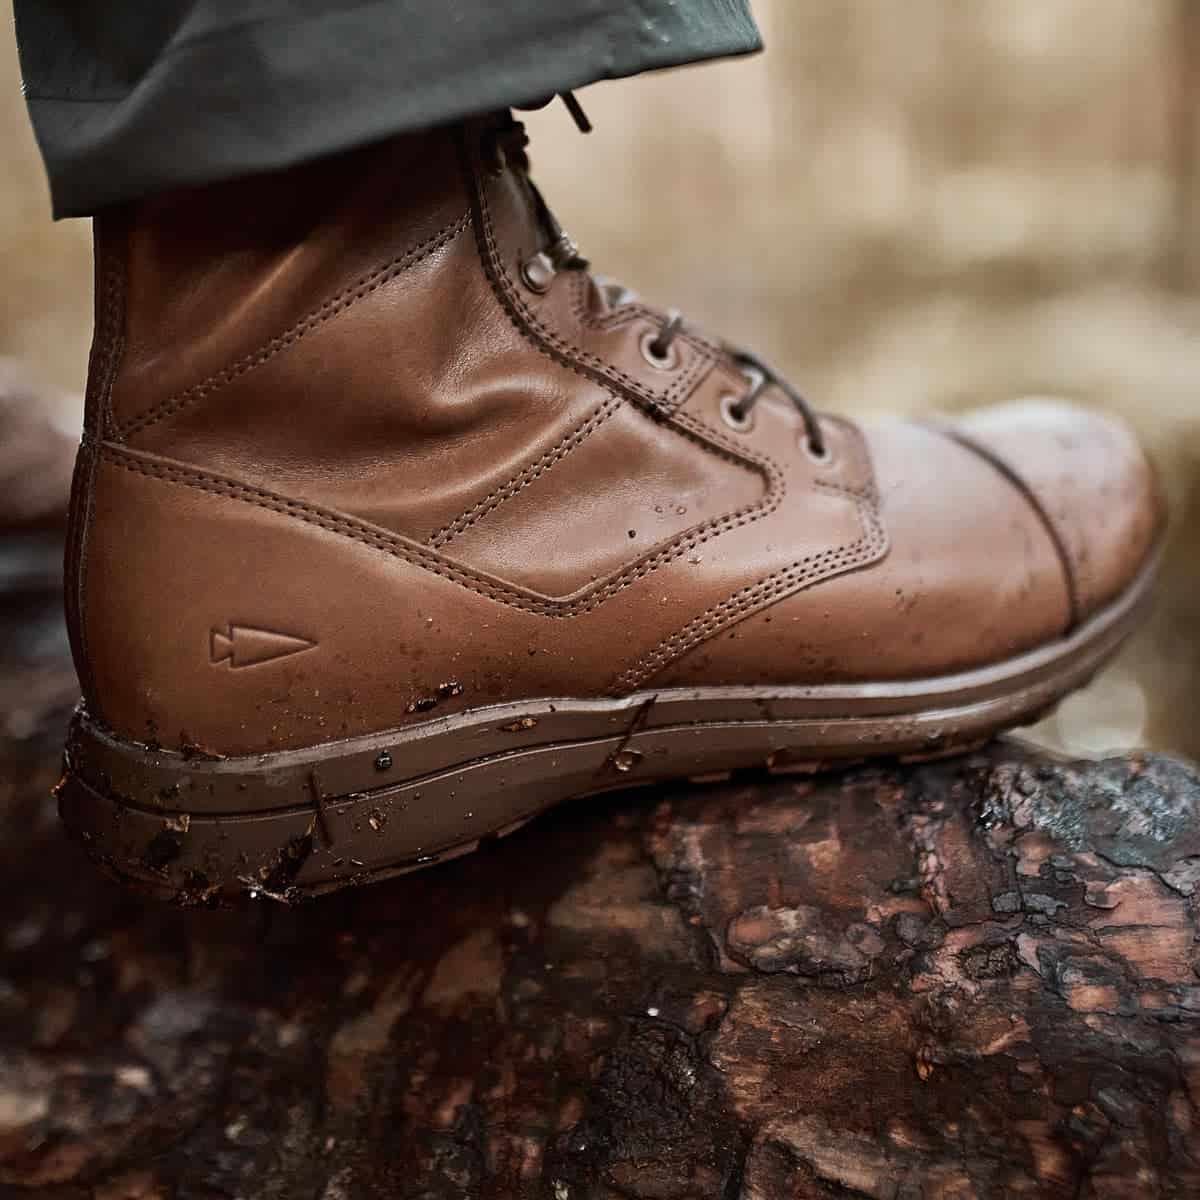 Heritage Jump Boots from GORUCK - Get Your Ruck On